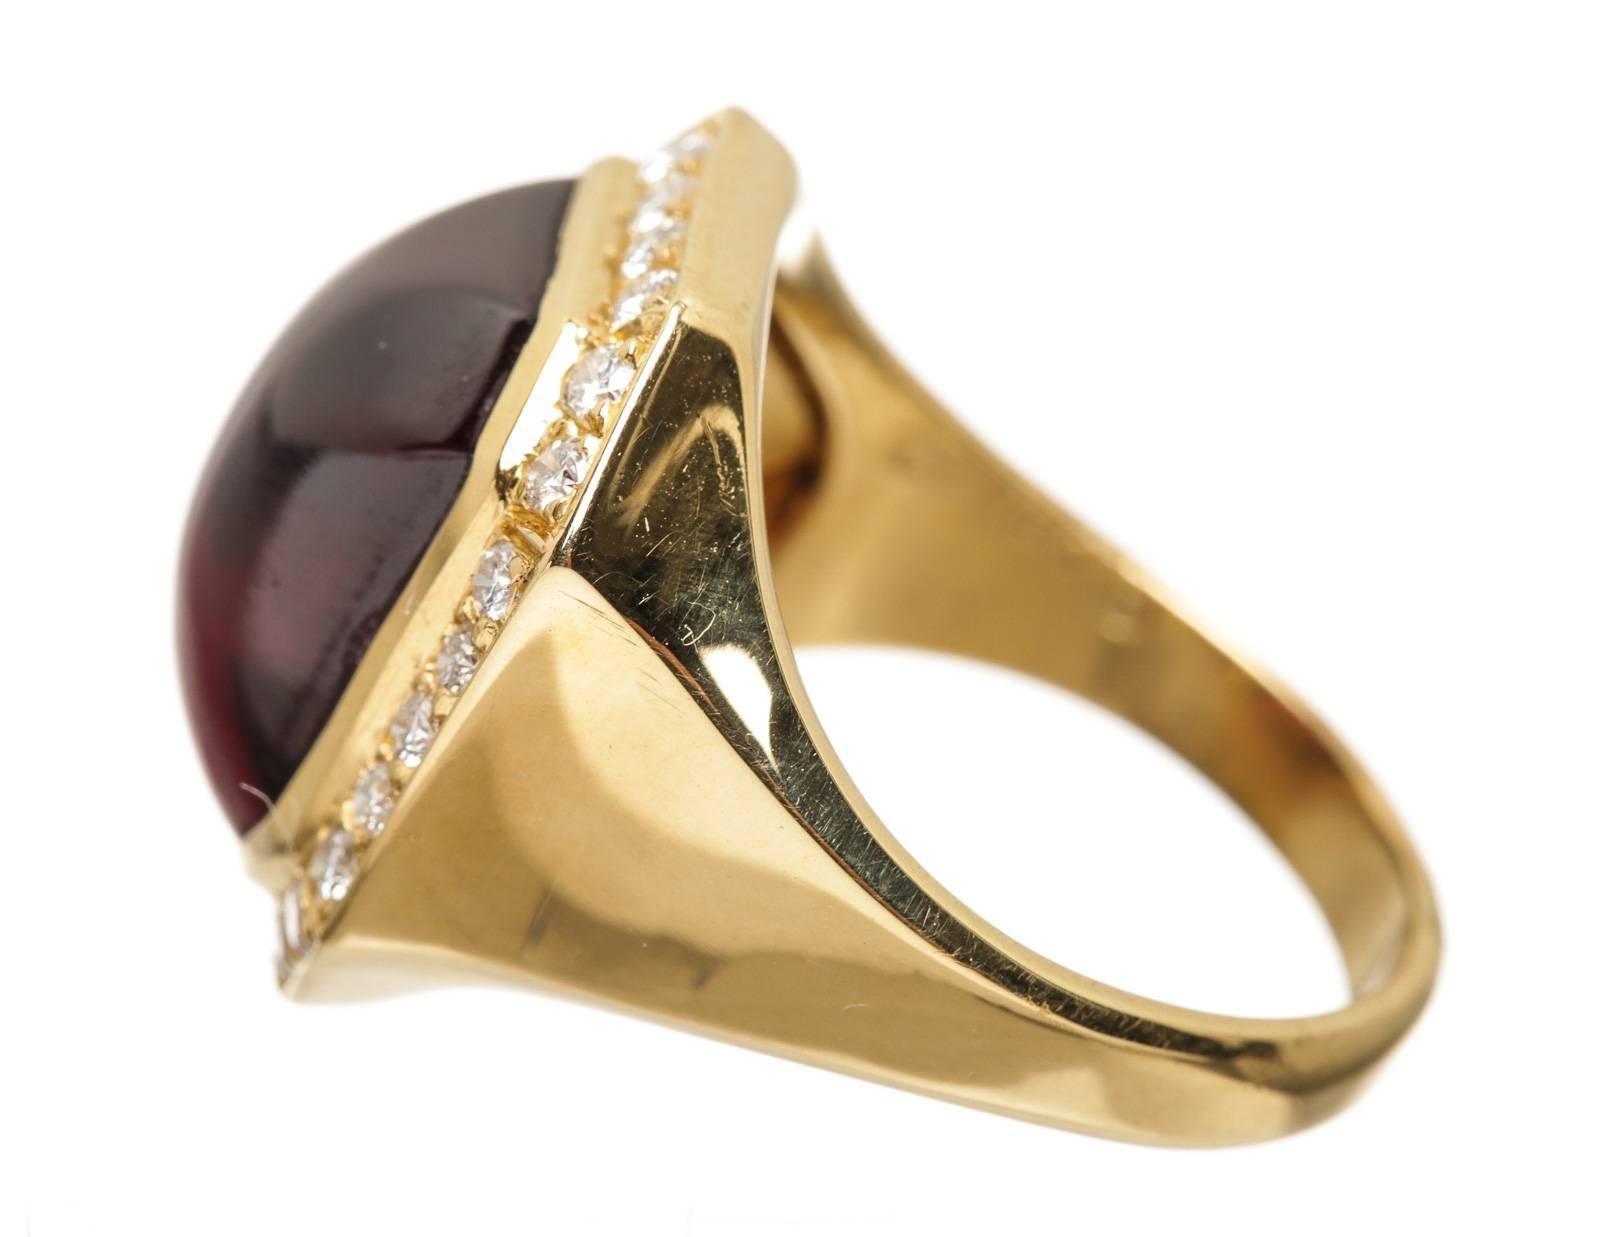 Crafted from 18k yellow gold, this ring is surrounded by diamonds and a large cabochon garnet. The garnet weighs approximately 8.16 carats.  Approximately .51 carats of diamonds.